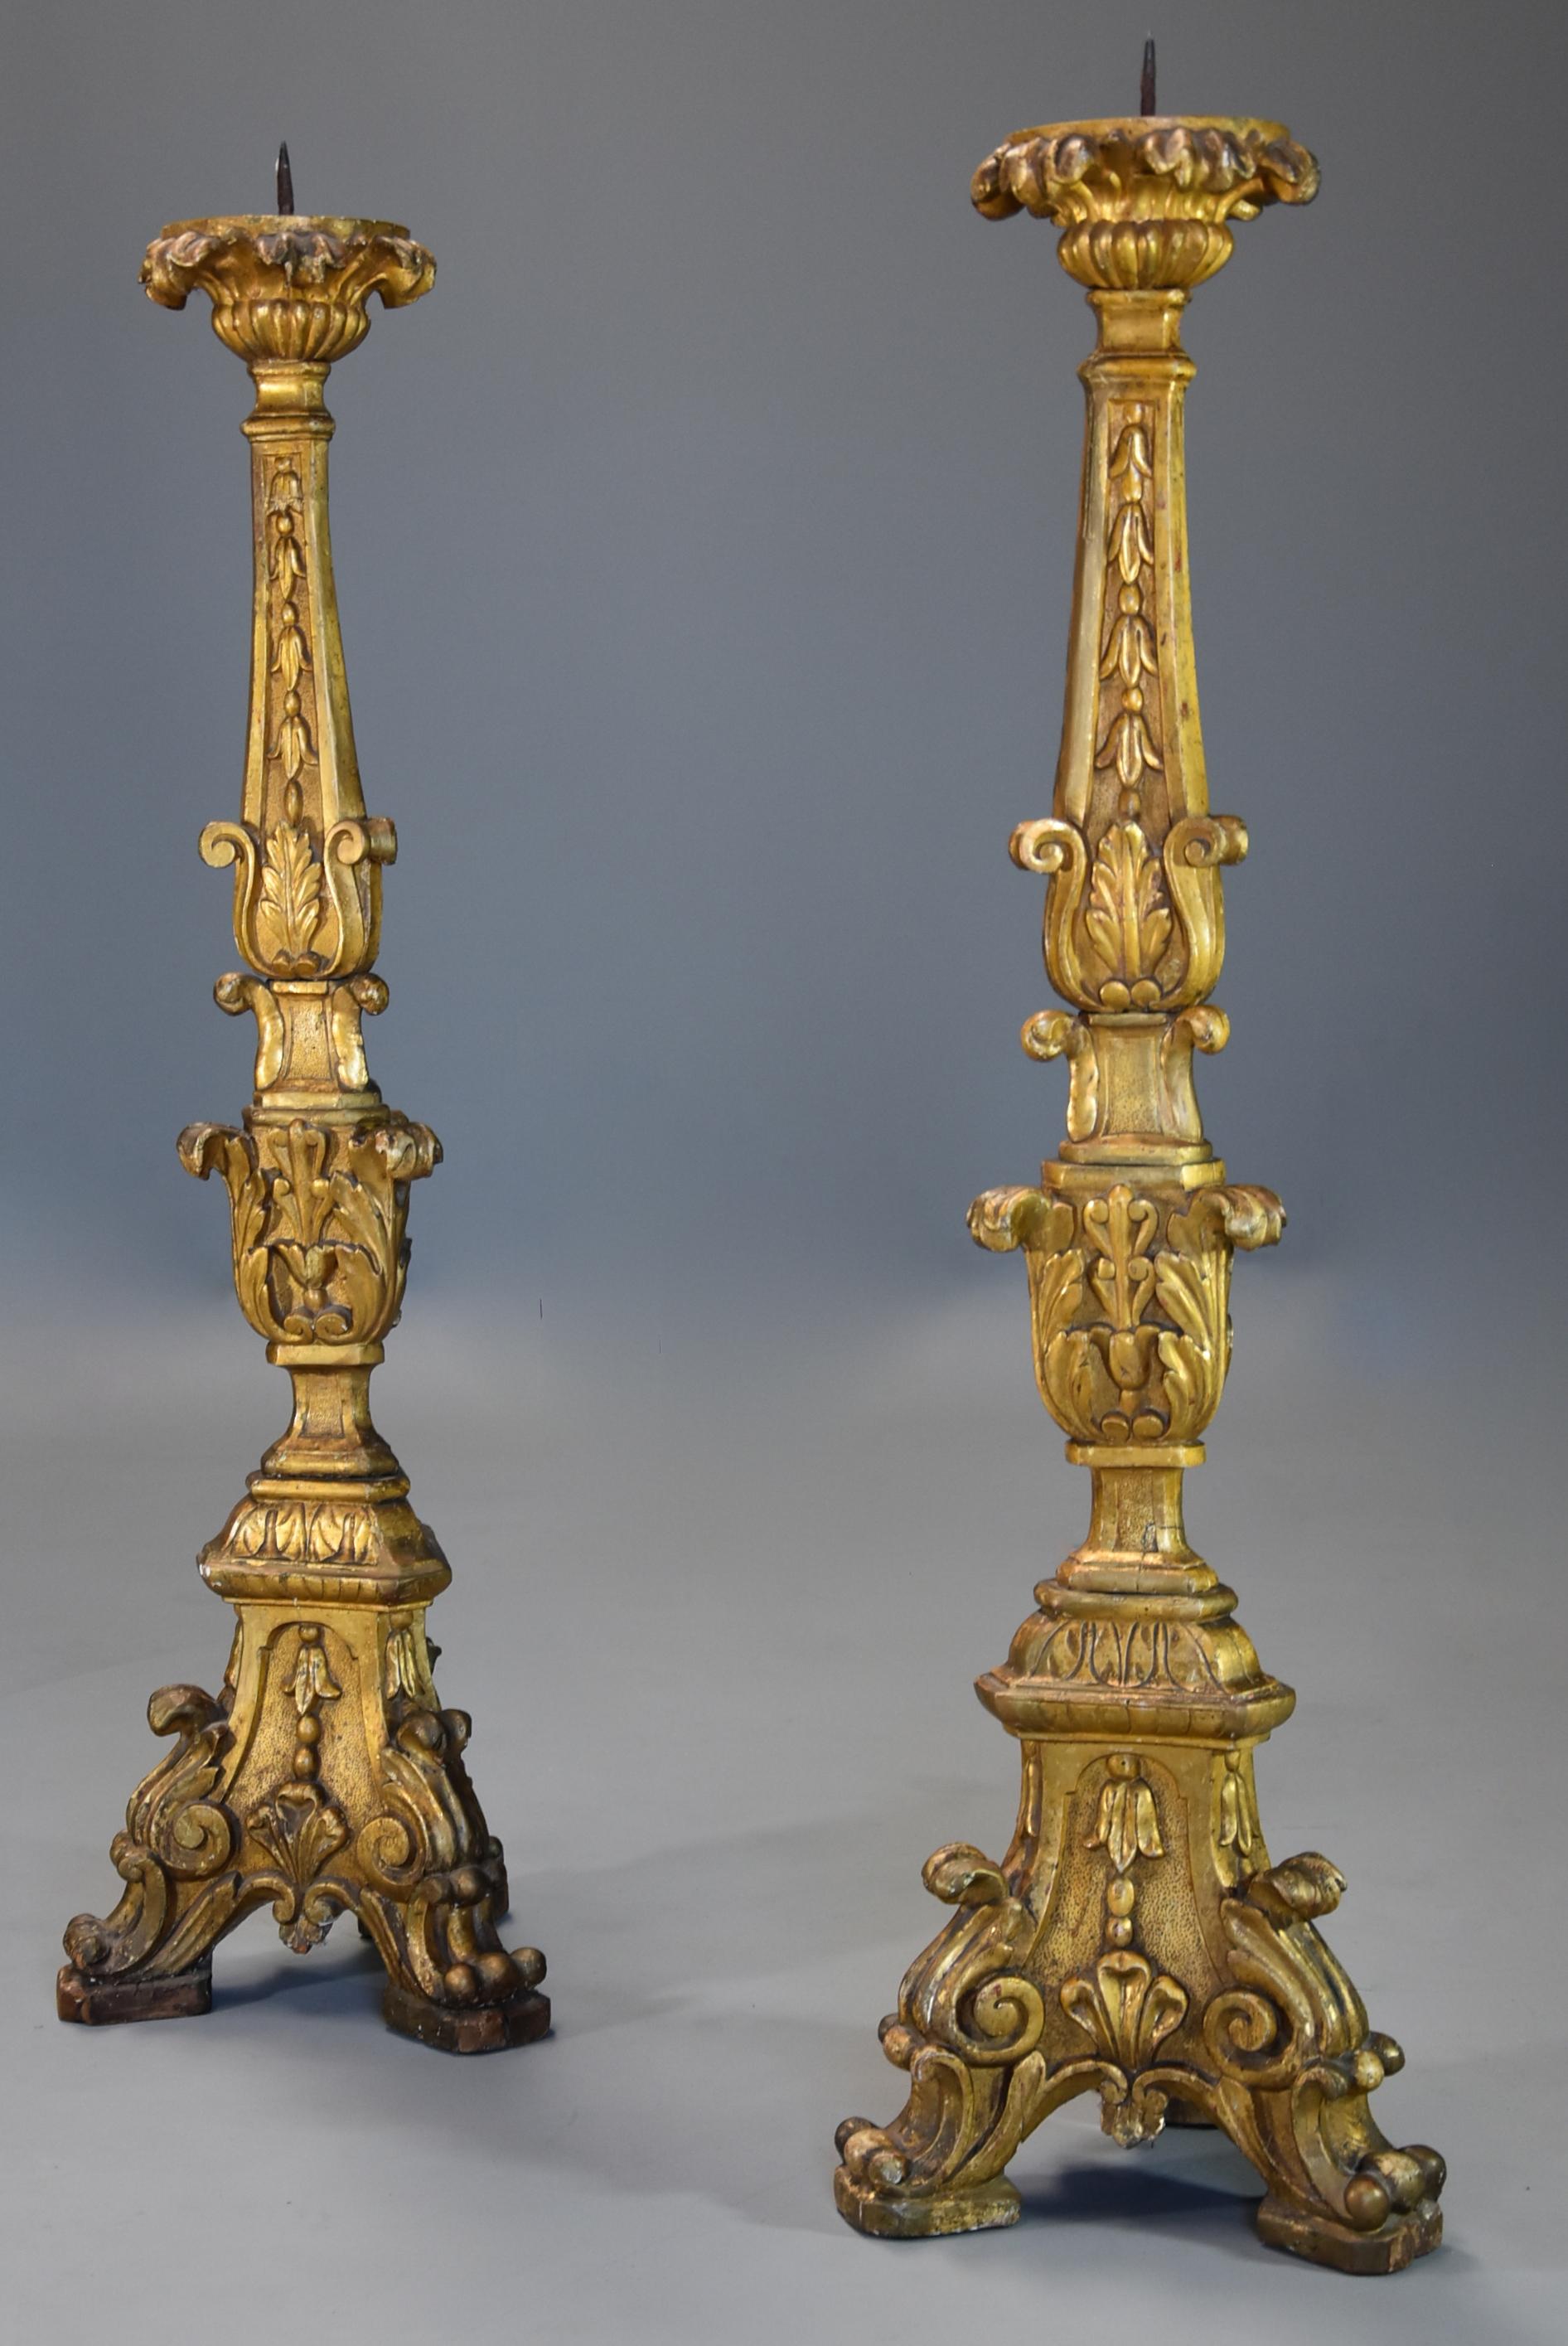 A pair of large 18th century Italian Rococo carved giltwood pricket candlesticks, one of the three sides being gilt and the other two sides being silver gilt making them very versatile! 

These impressive candlesticks each consist of a circular